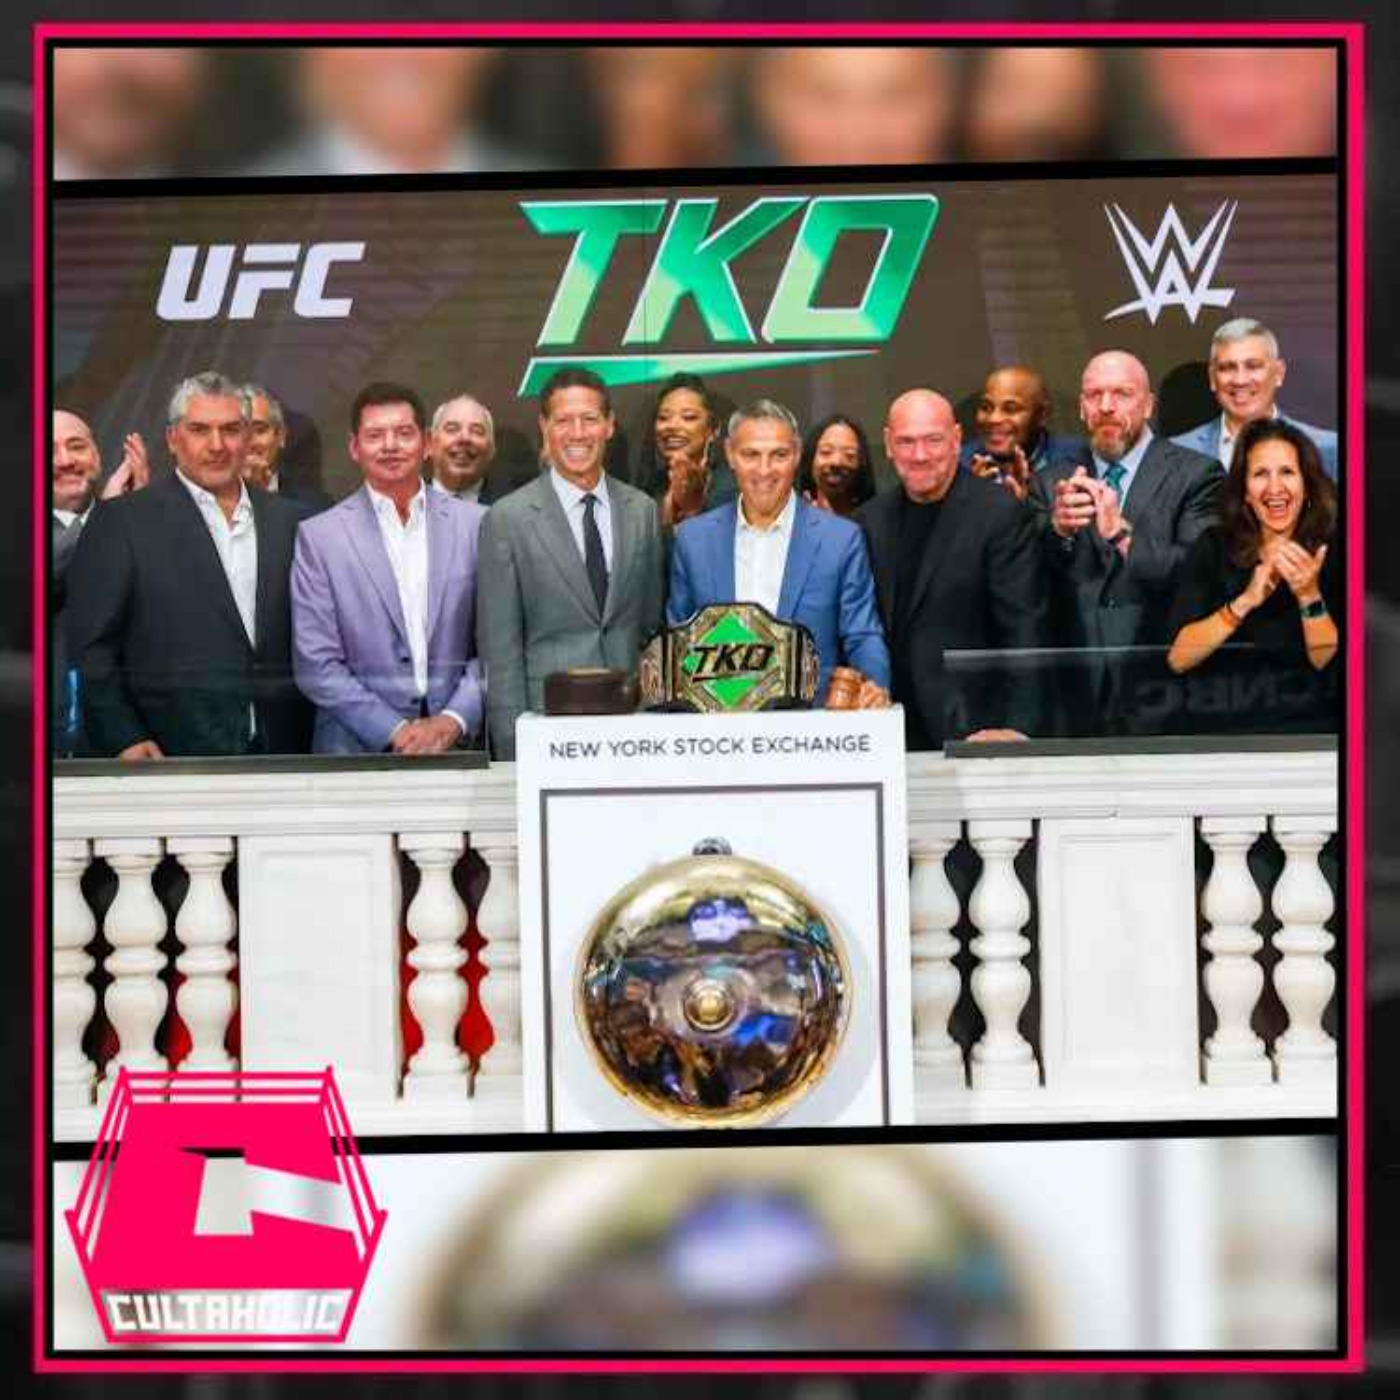 NEWS: WWE And UFC Become TKO Holdings: Future Plans, Stock Market Reaction, Vince McMahon's Role and More!